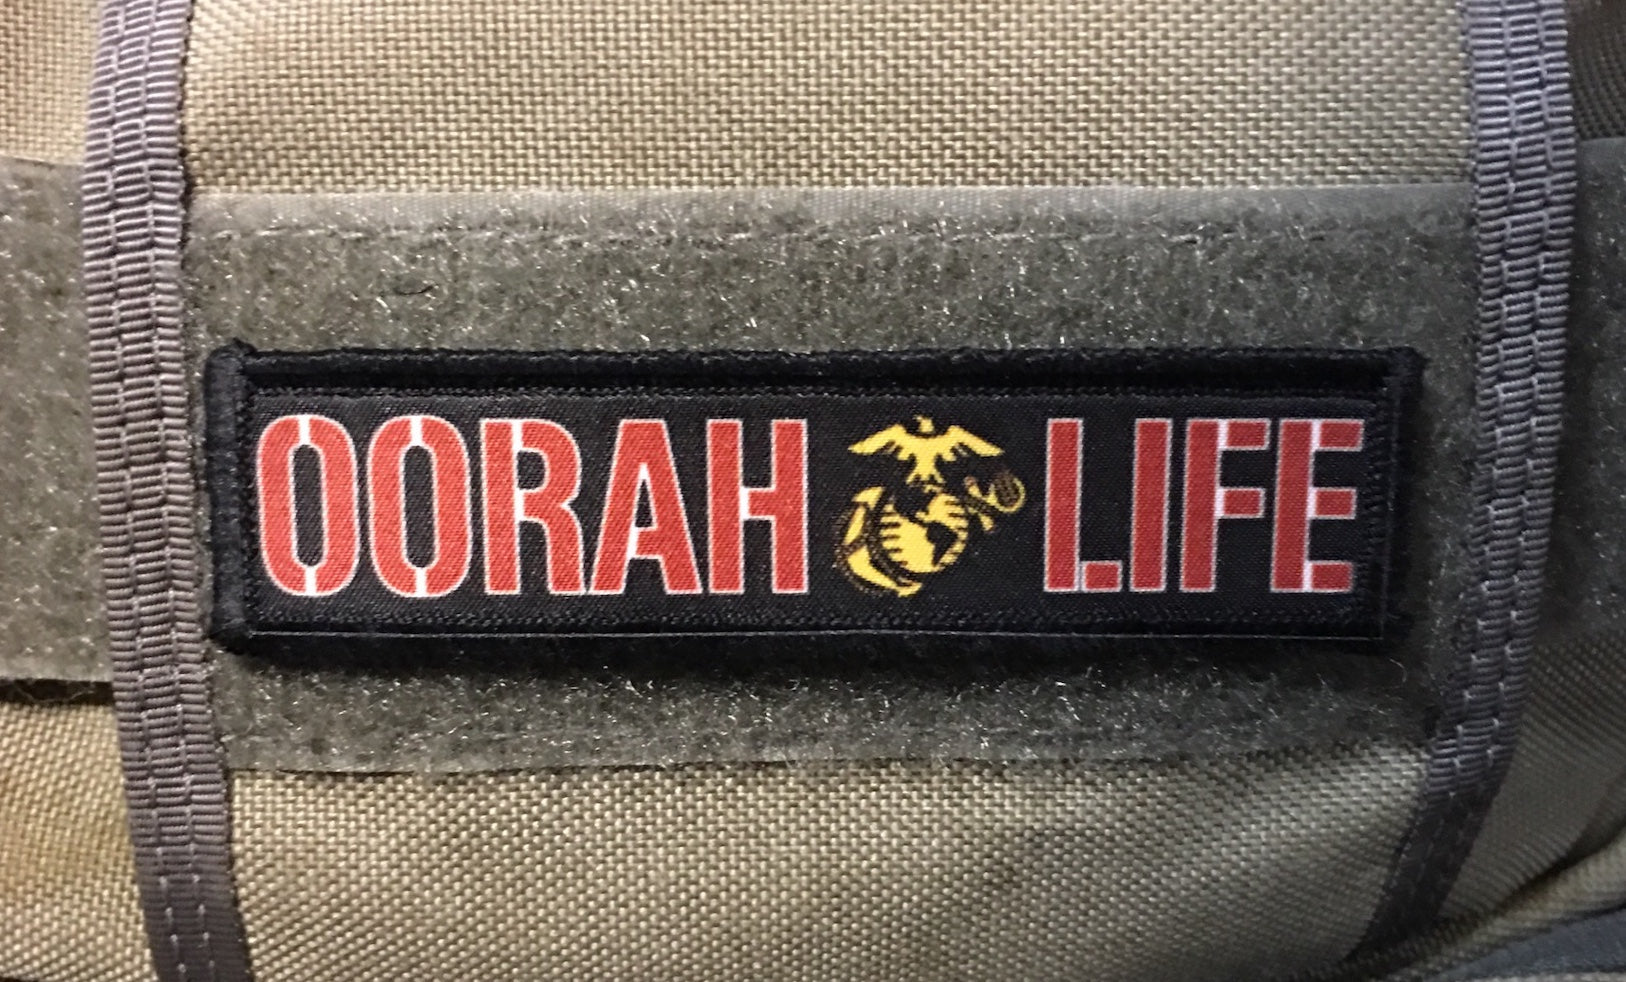 1x4 "Oorah Life" Marines USMC Morale Patch Morale Patches Redheaded T Shirts 